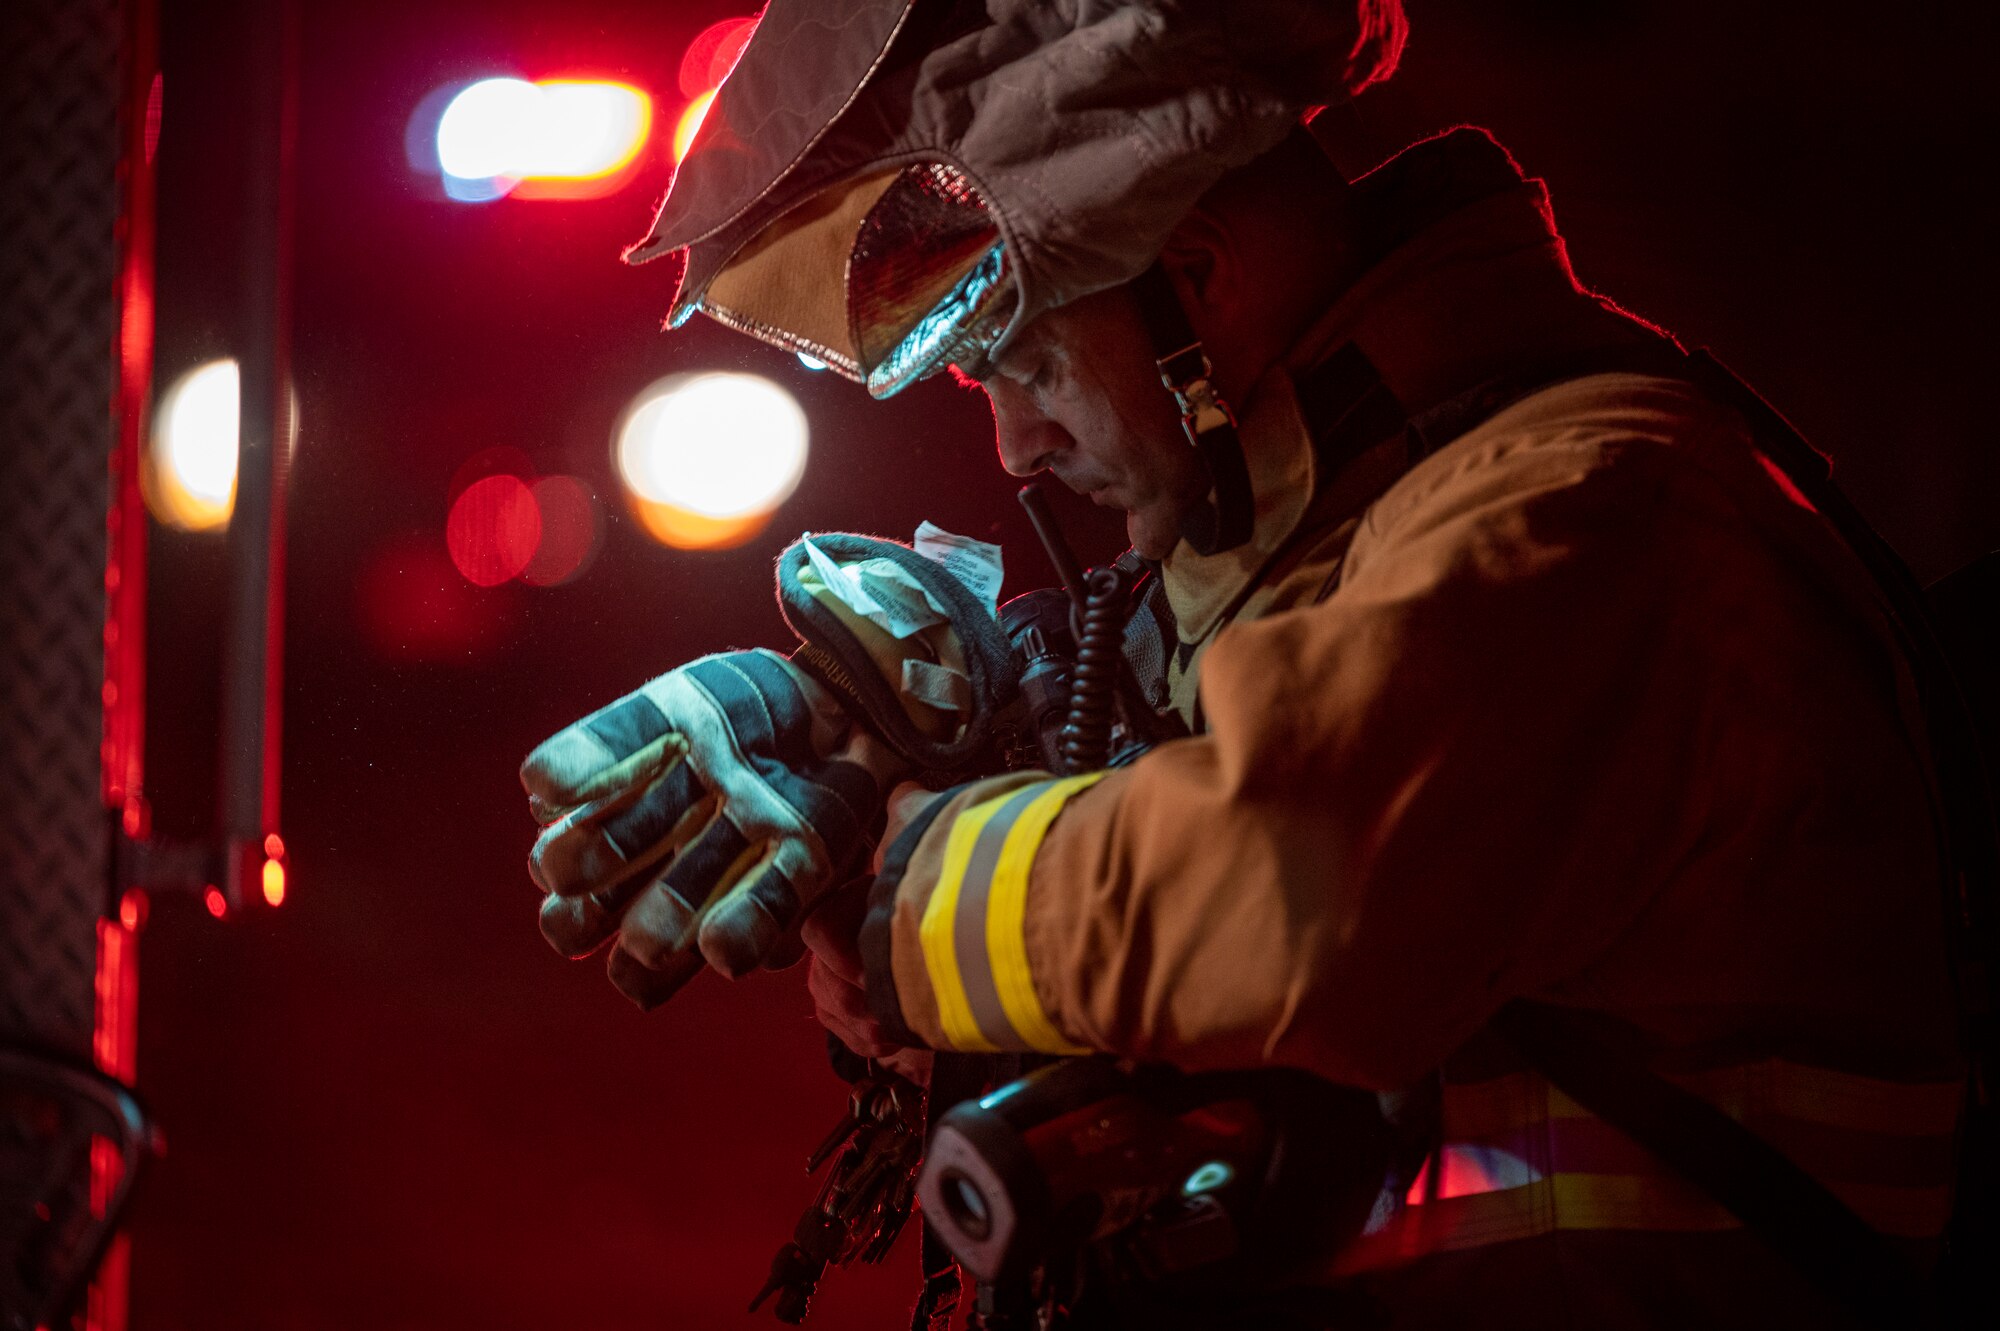 U.S. Air Force Staff Sgt. Larry McIver, 51st Civil Engineer Squadron lead firefighter, removes his gear after a fire response training scenario at Osan Air Base, Republic of Korea, Sept. 14, 2022.